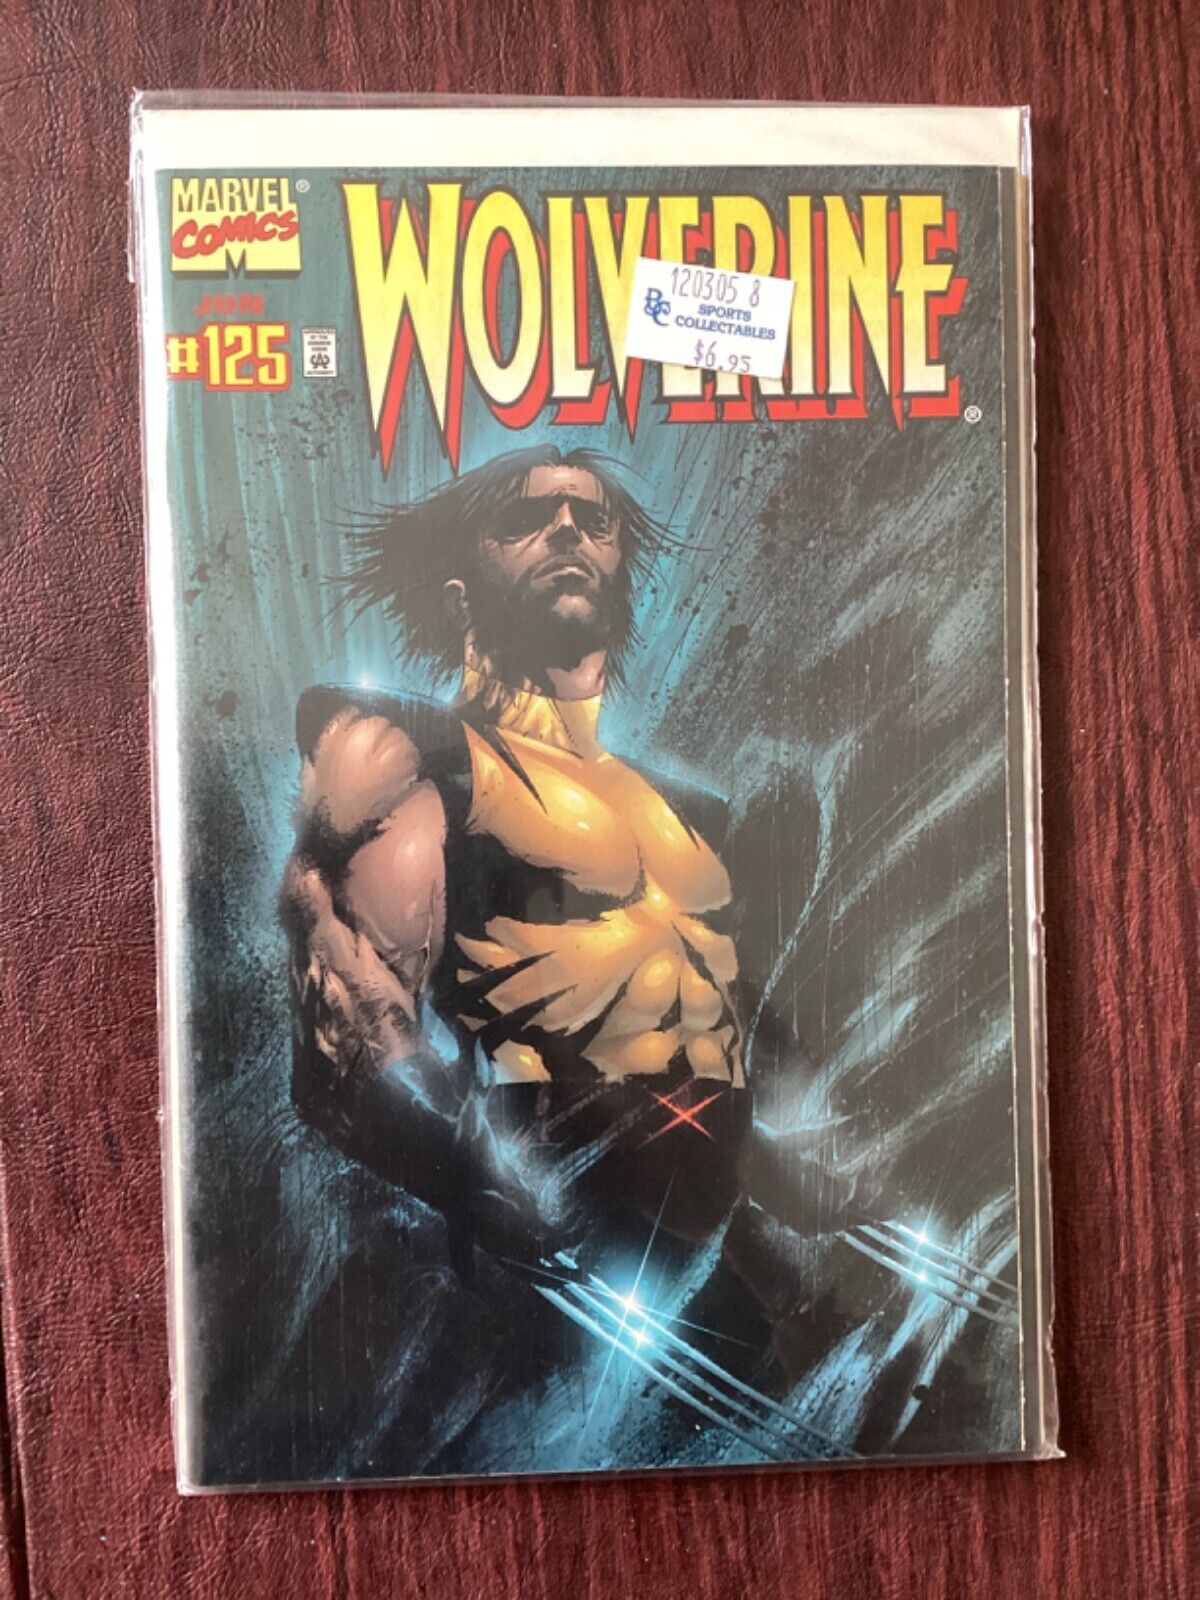 Wolverine #125 Jae Lee alternate cover  - Still closed with Dynamic Force Seal